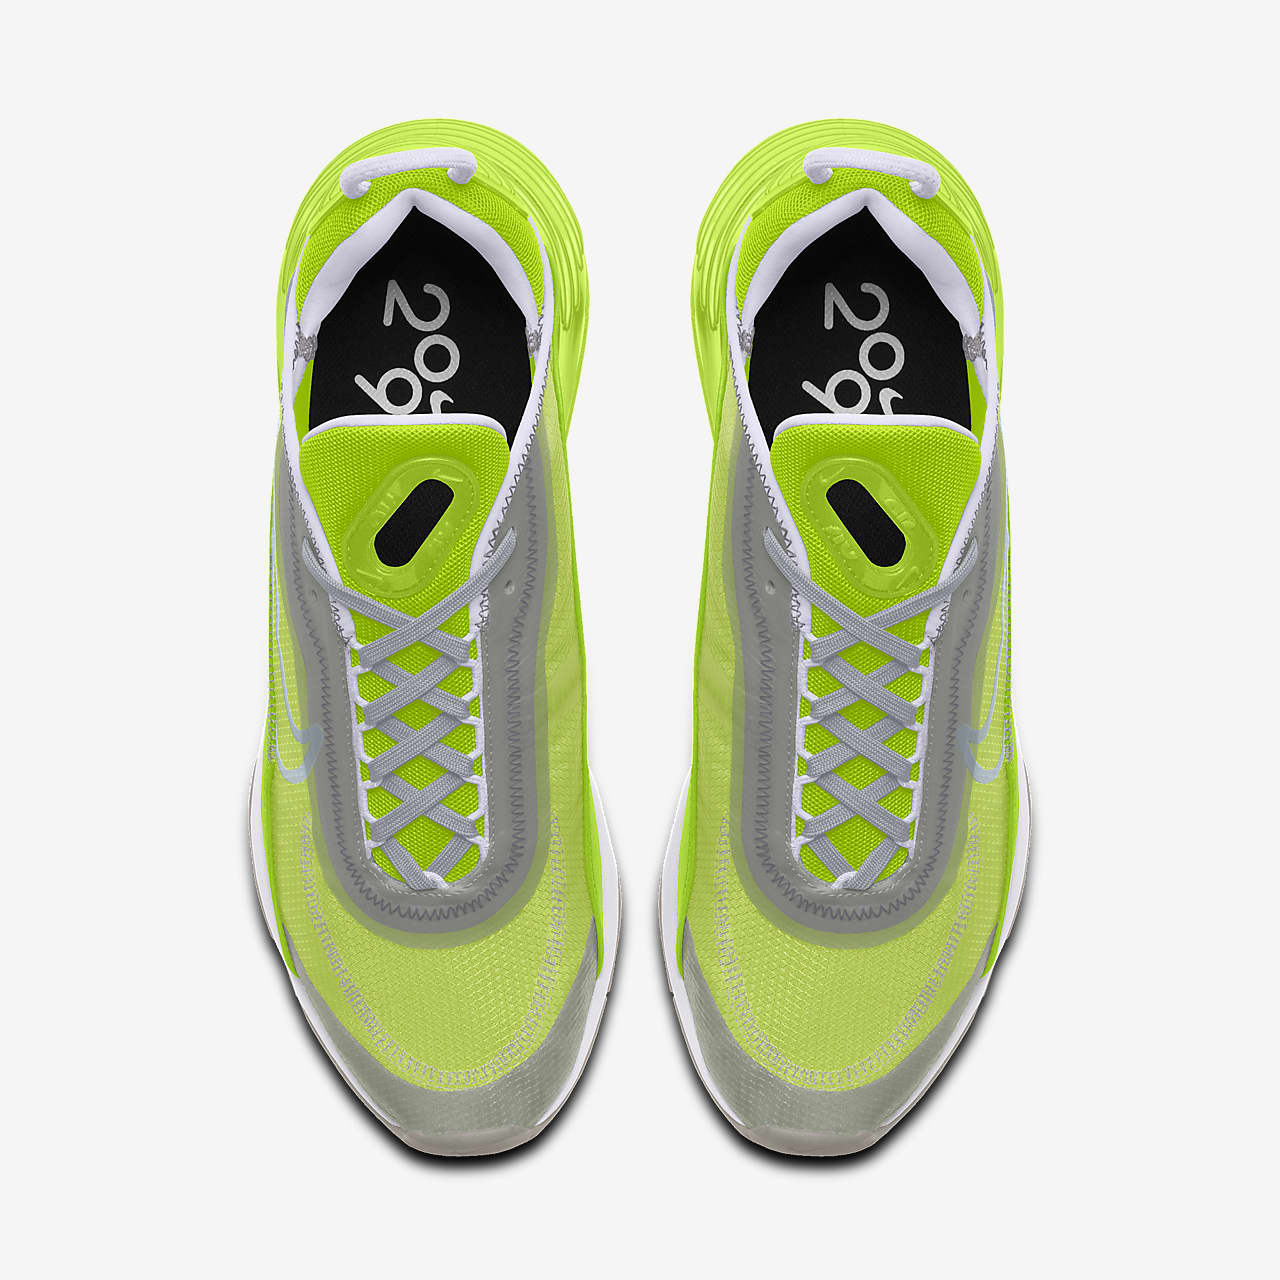 nike air max 2090 by you